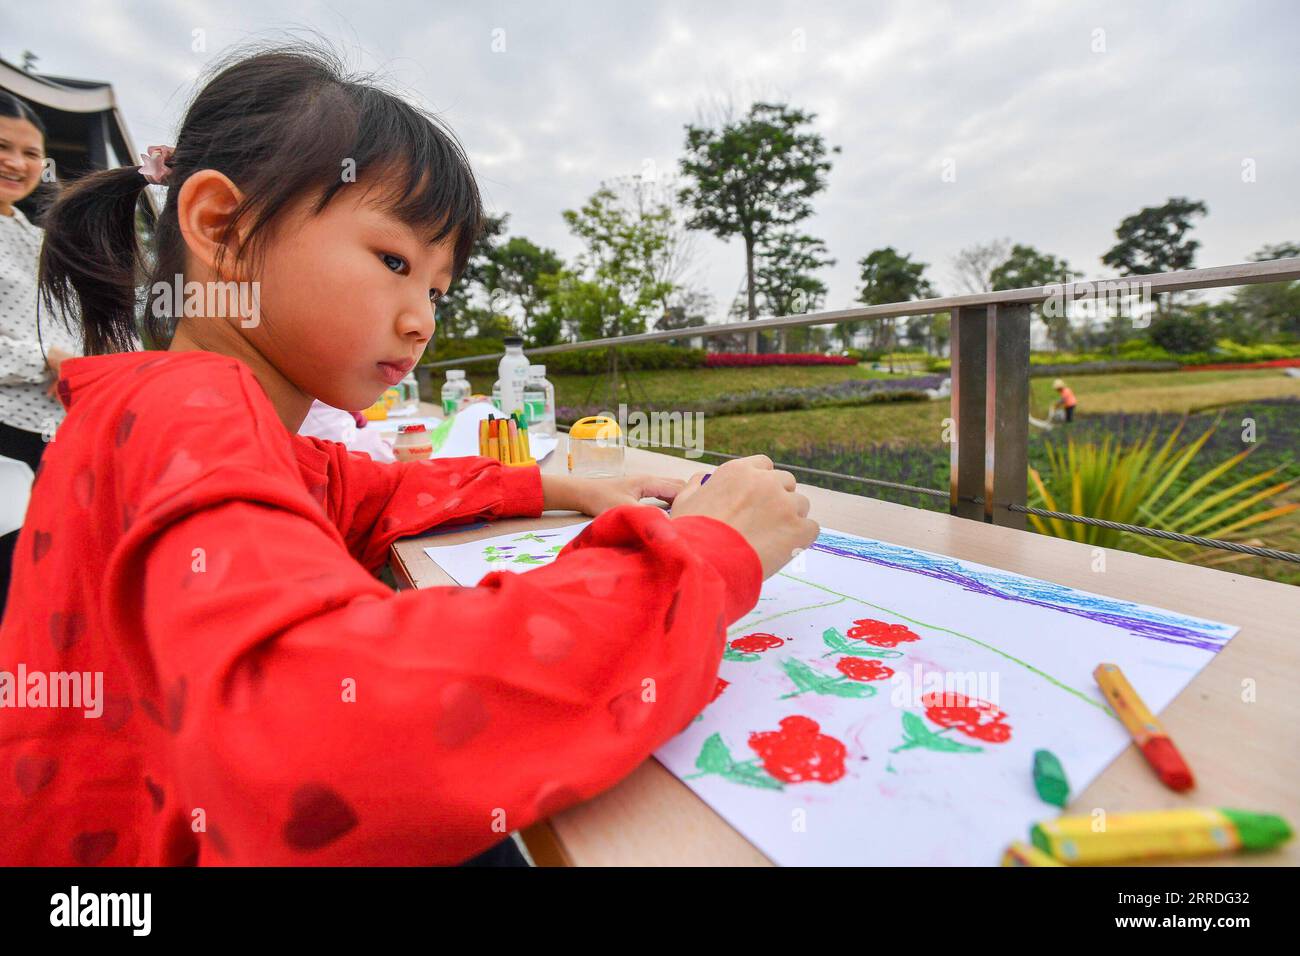 211223 -- GUANGZHOU, Dec. 23, 2021 -- A girl draws pictures while visiting Guangzhou Lijiao sewage treatment plant in Guangzhou, south China s Guangdong Province, Nov. 21, 2021. Traditional sewage treatment plants are being transformed into ecological underground sewage treatment plants in Guangzhou, to improve land utilization and tackle problems of secondary pollution. With the first underground sewage treatment plant in Guangzhou was built in 2009, the city has built and upgraded 9 such plants so far, with a daily sewage treatment capacity of 1.81 million tonnes. Sewage treatment facilities Stock Photo